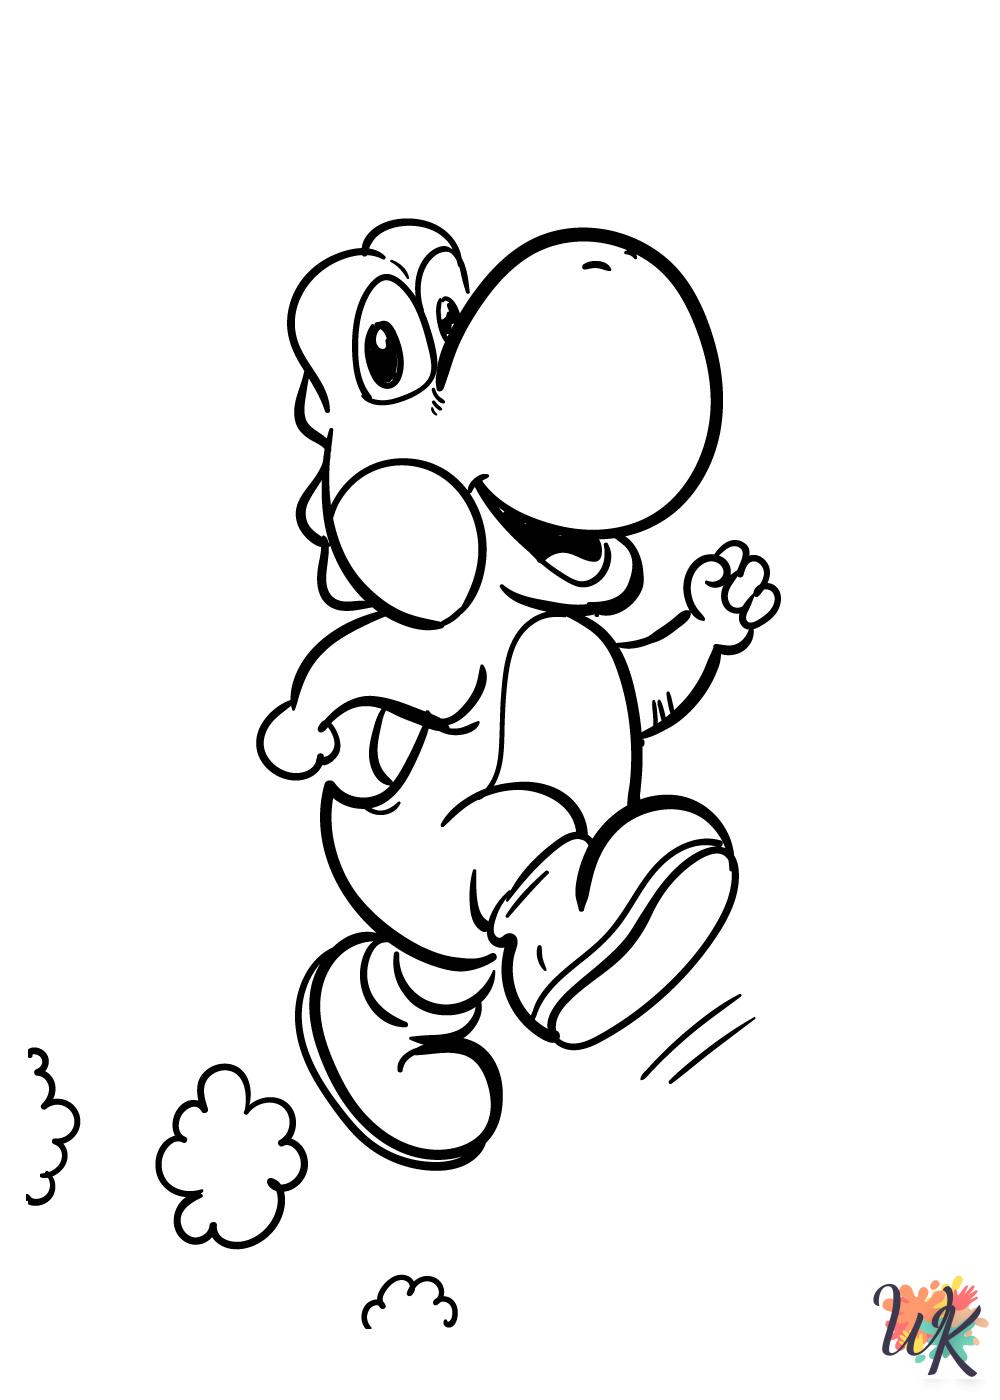 old-fashioned Super Mario Bros coloring pages